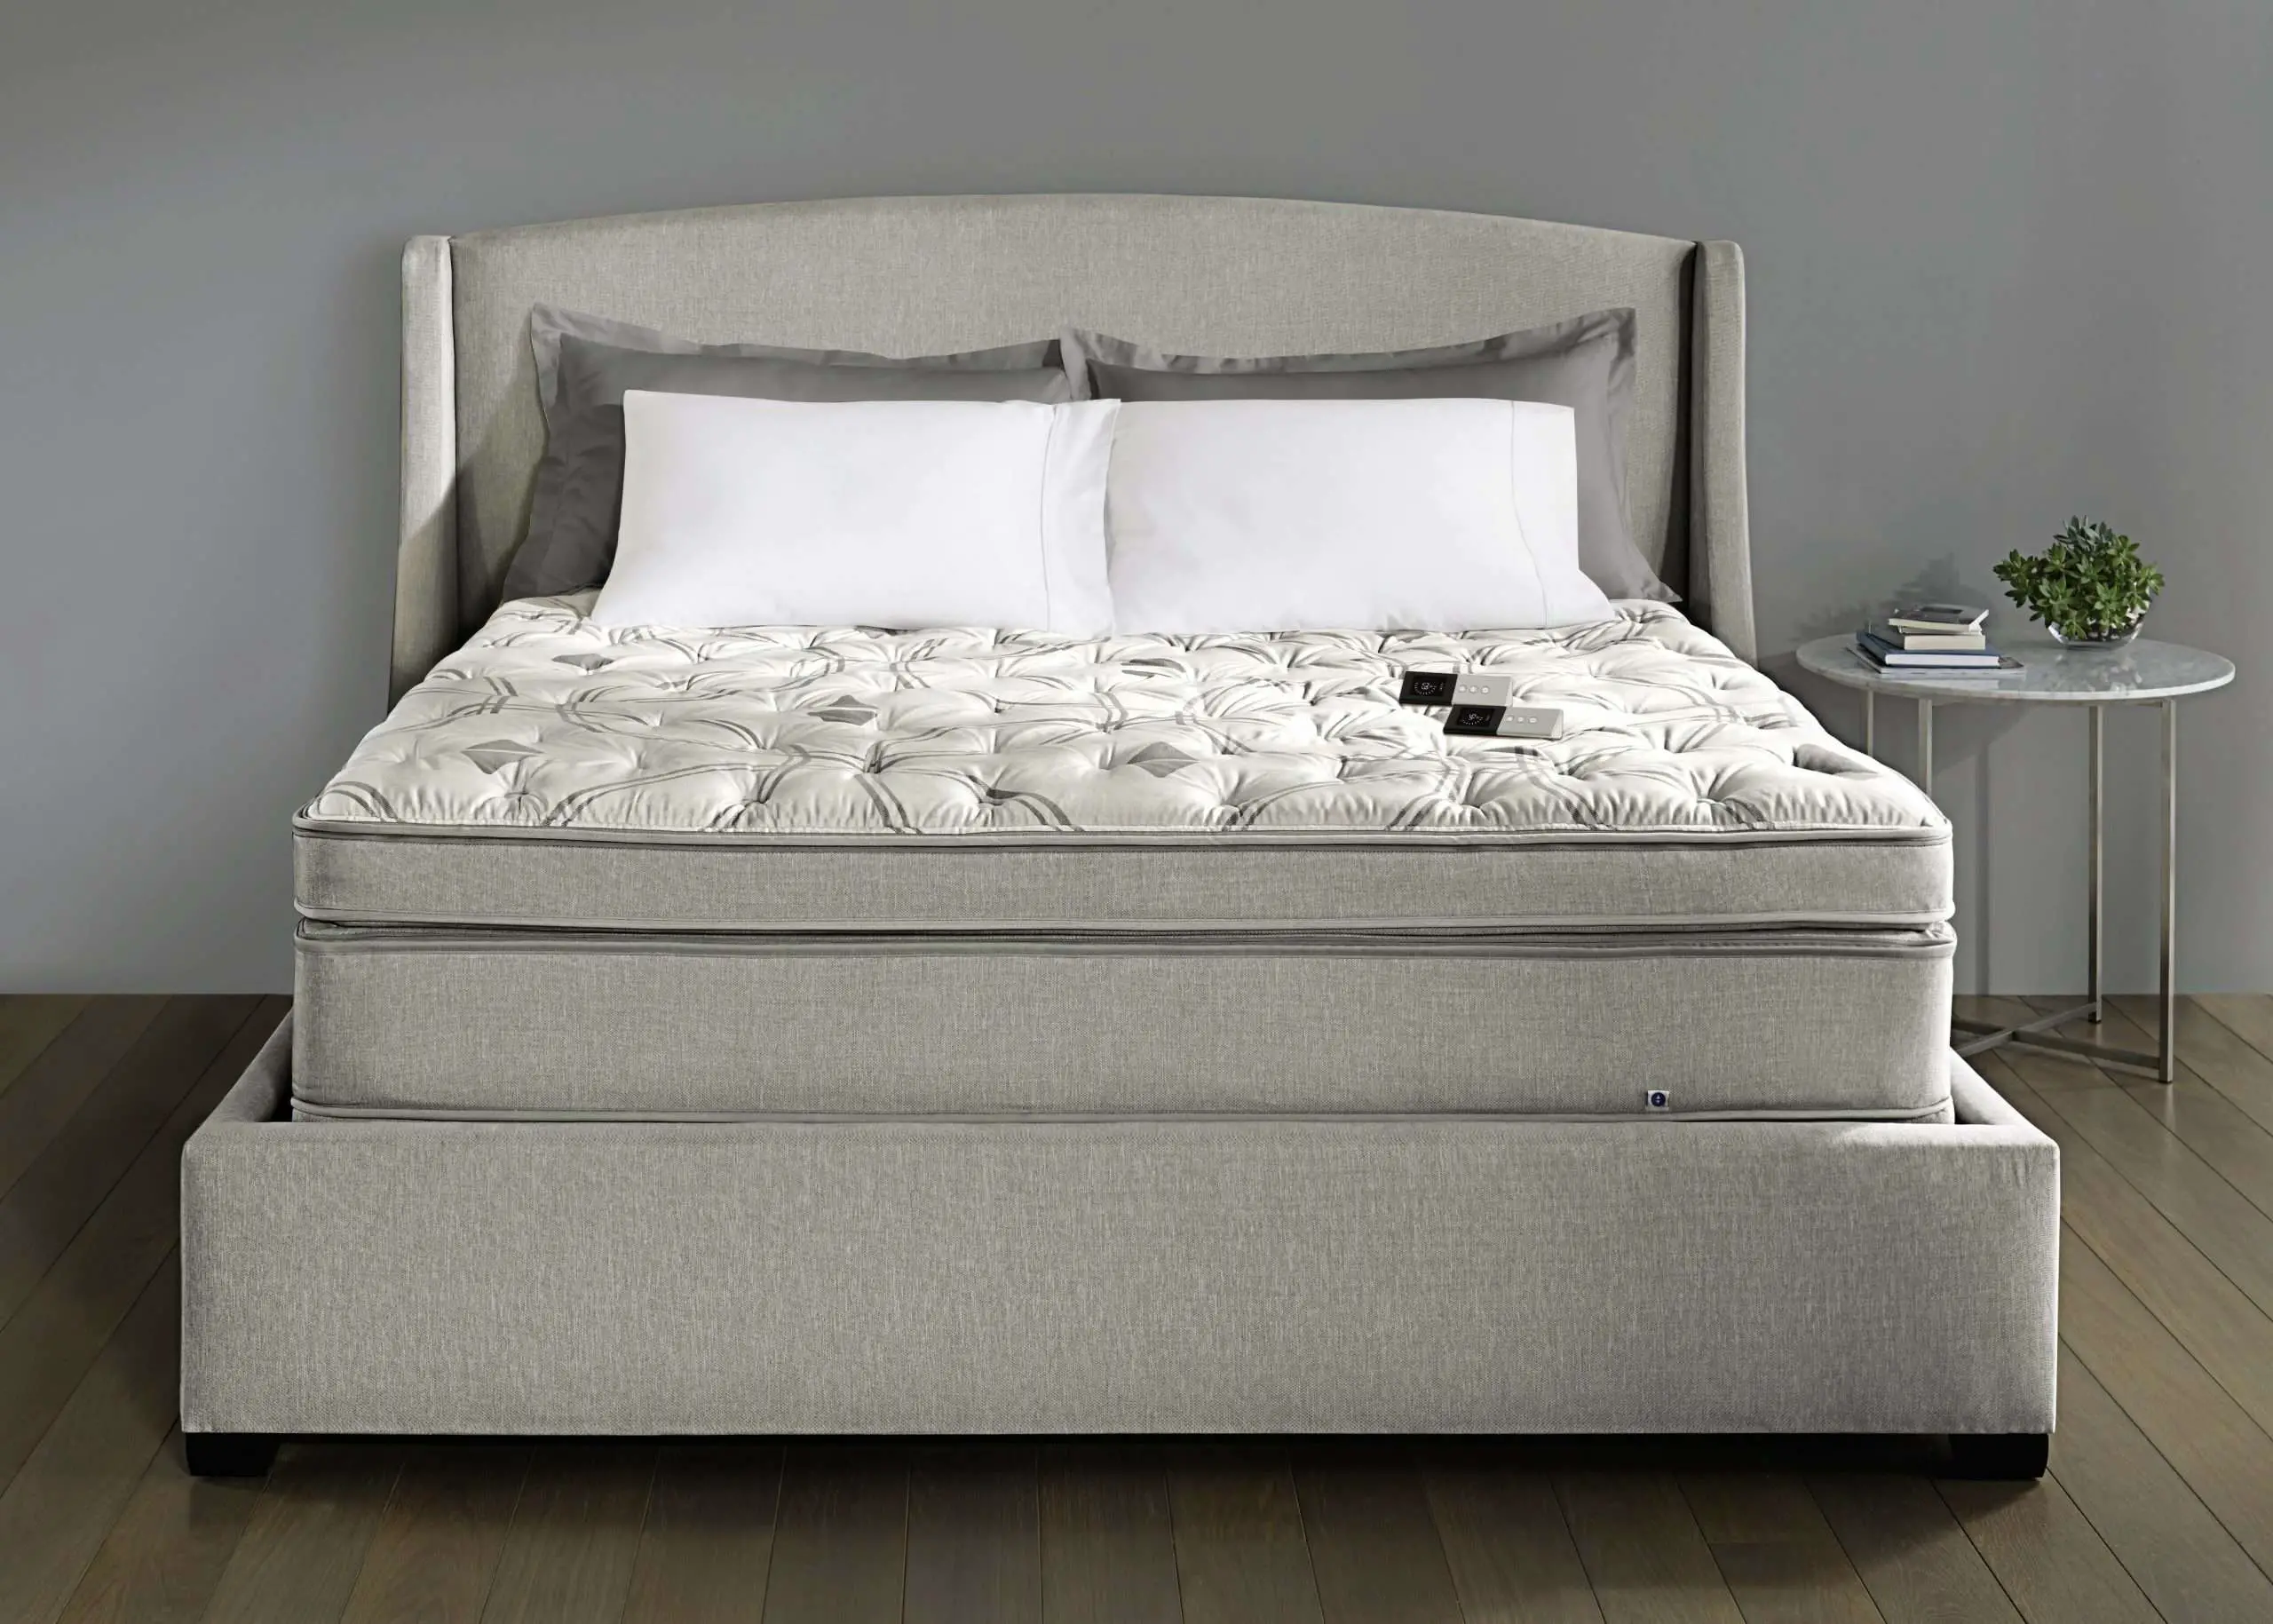 Top 10 Best Mattresses for Seniors with Back Pain for 2021